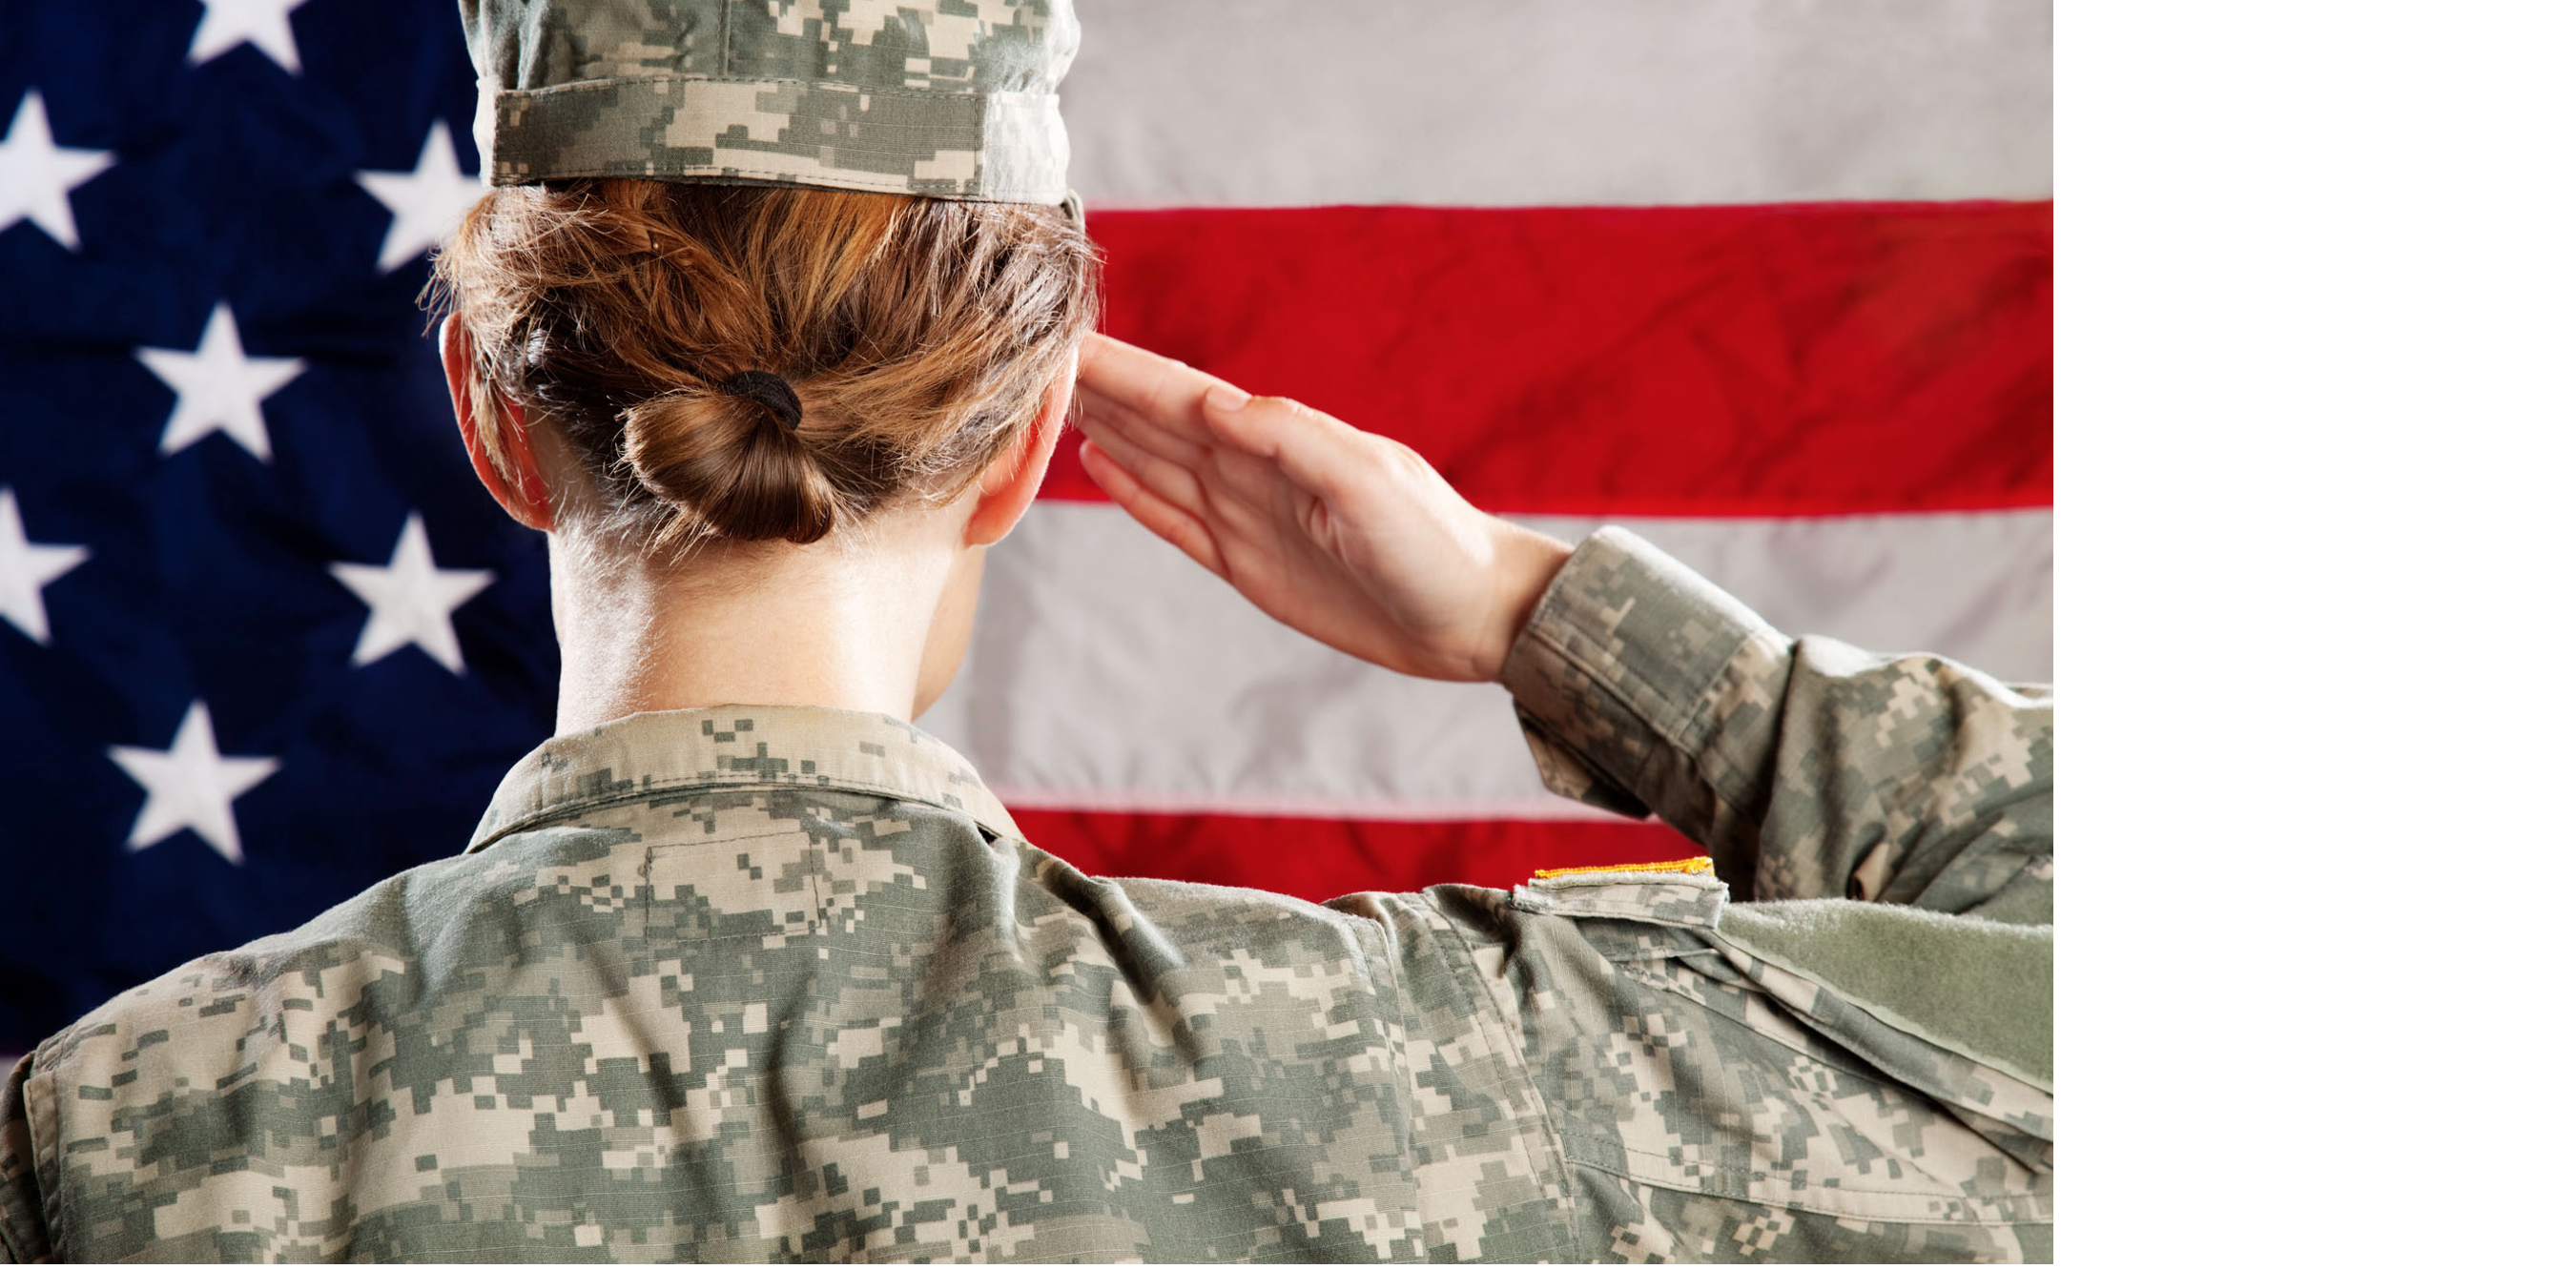 Woman saluting in front of flag